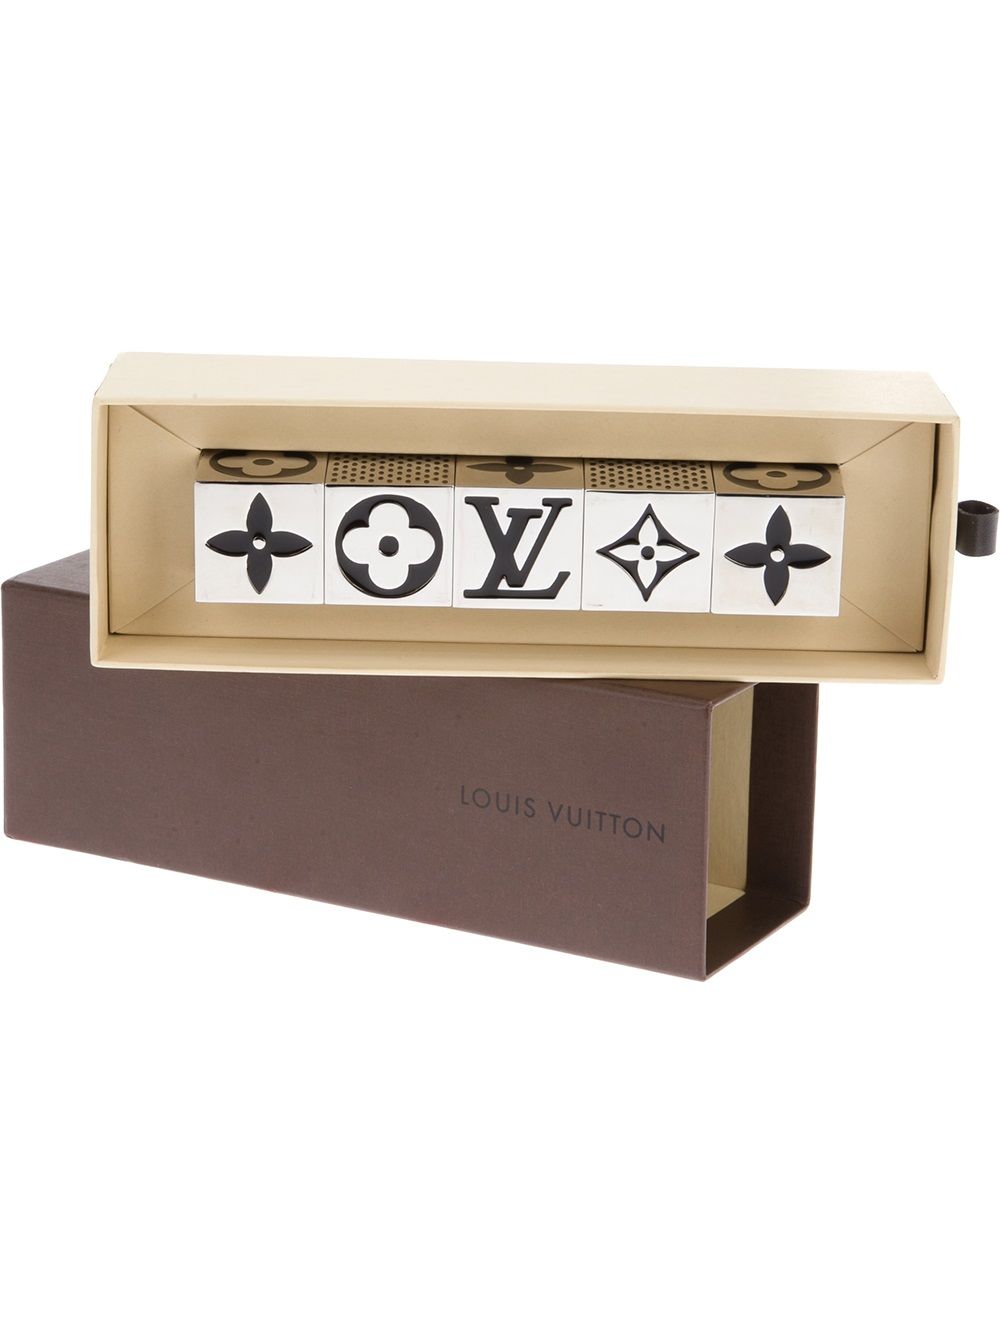 Louis Vuitton 2011 pre-owned Xmas VIP Novelty Dice Game - Farfetch